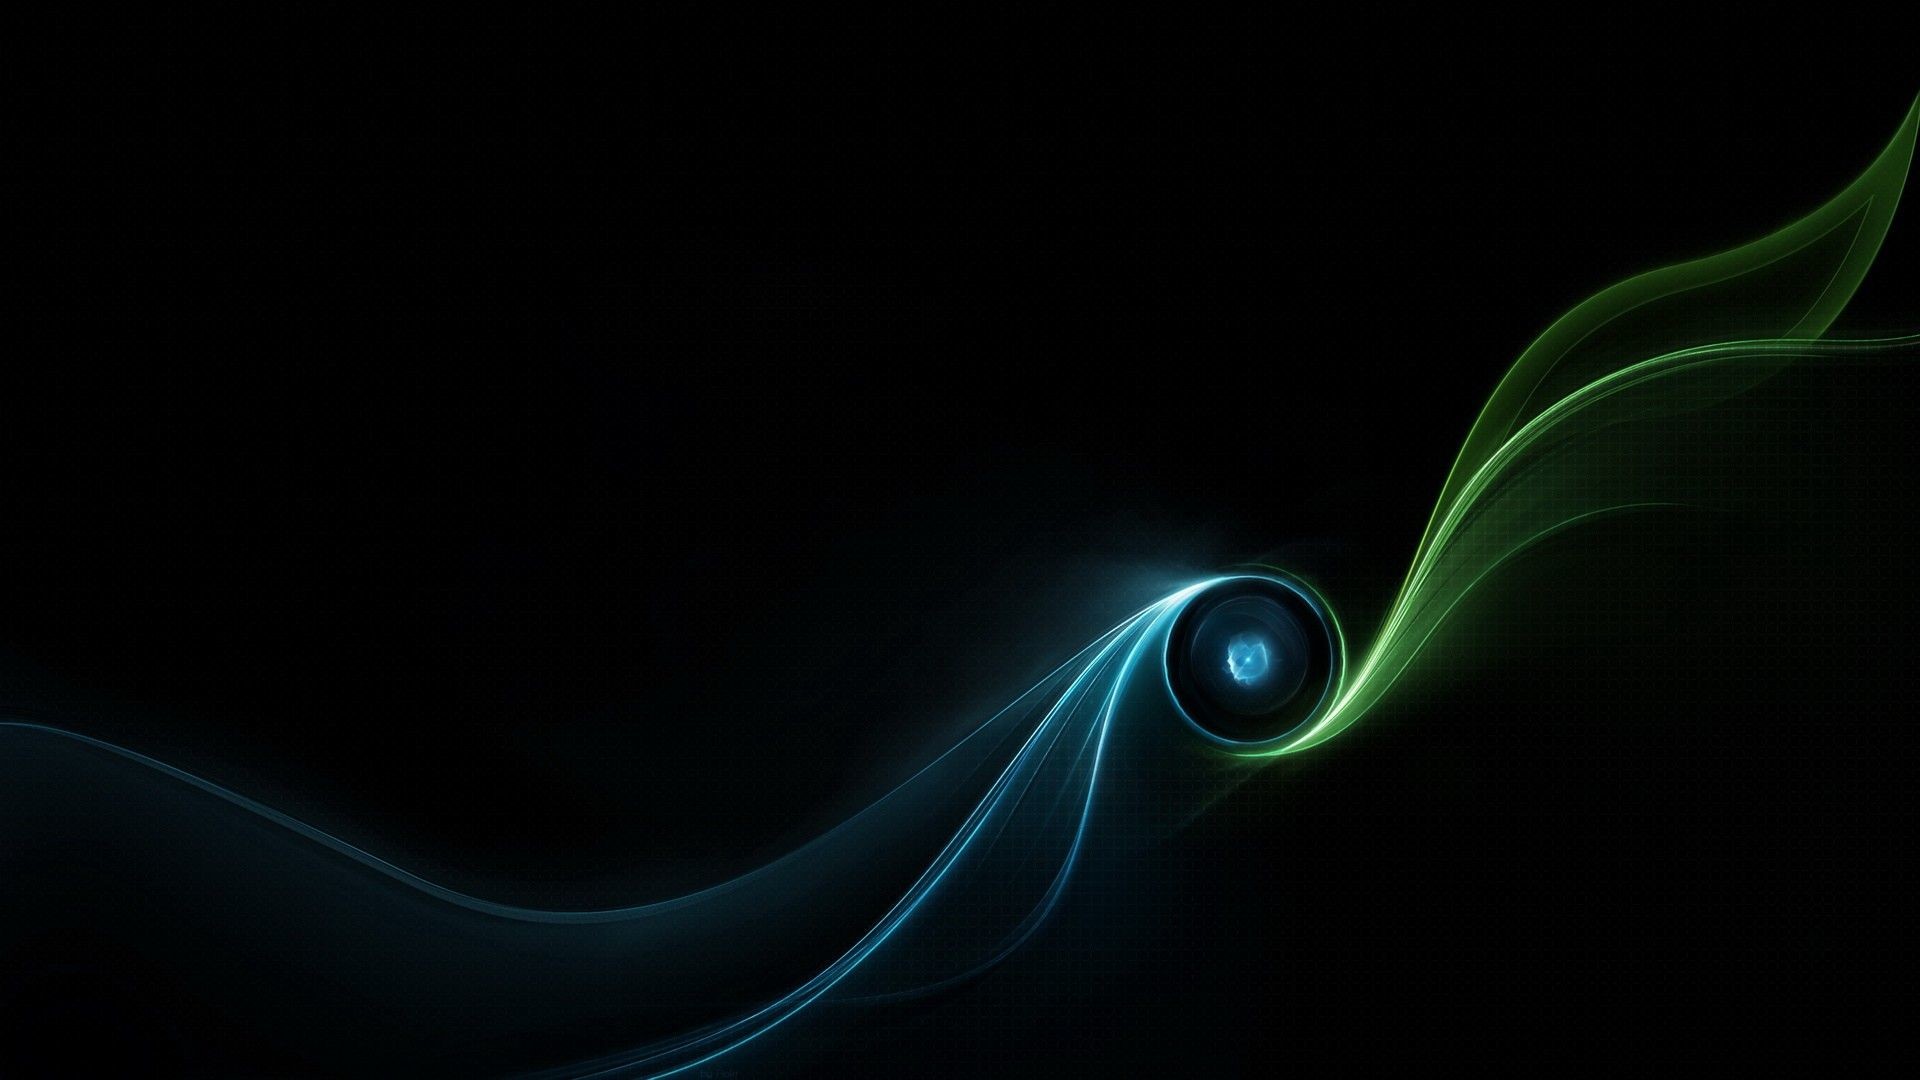 1920x1080 Dark Abstract Backgrounds - Wallpaper Cave